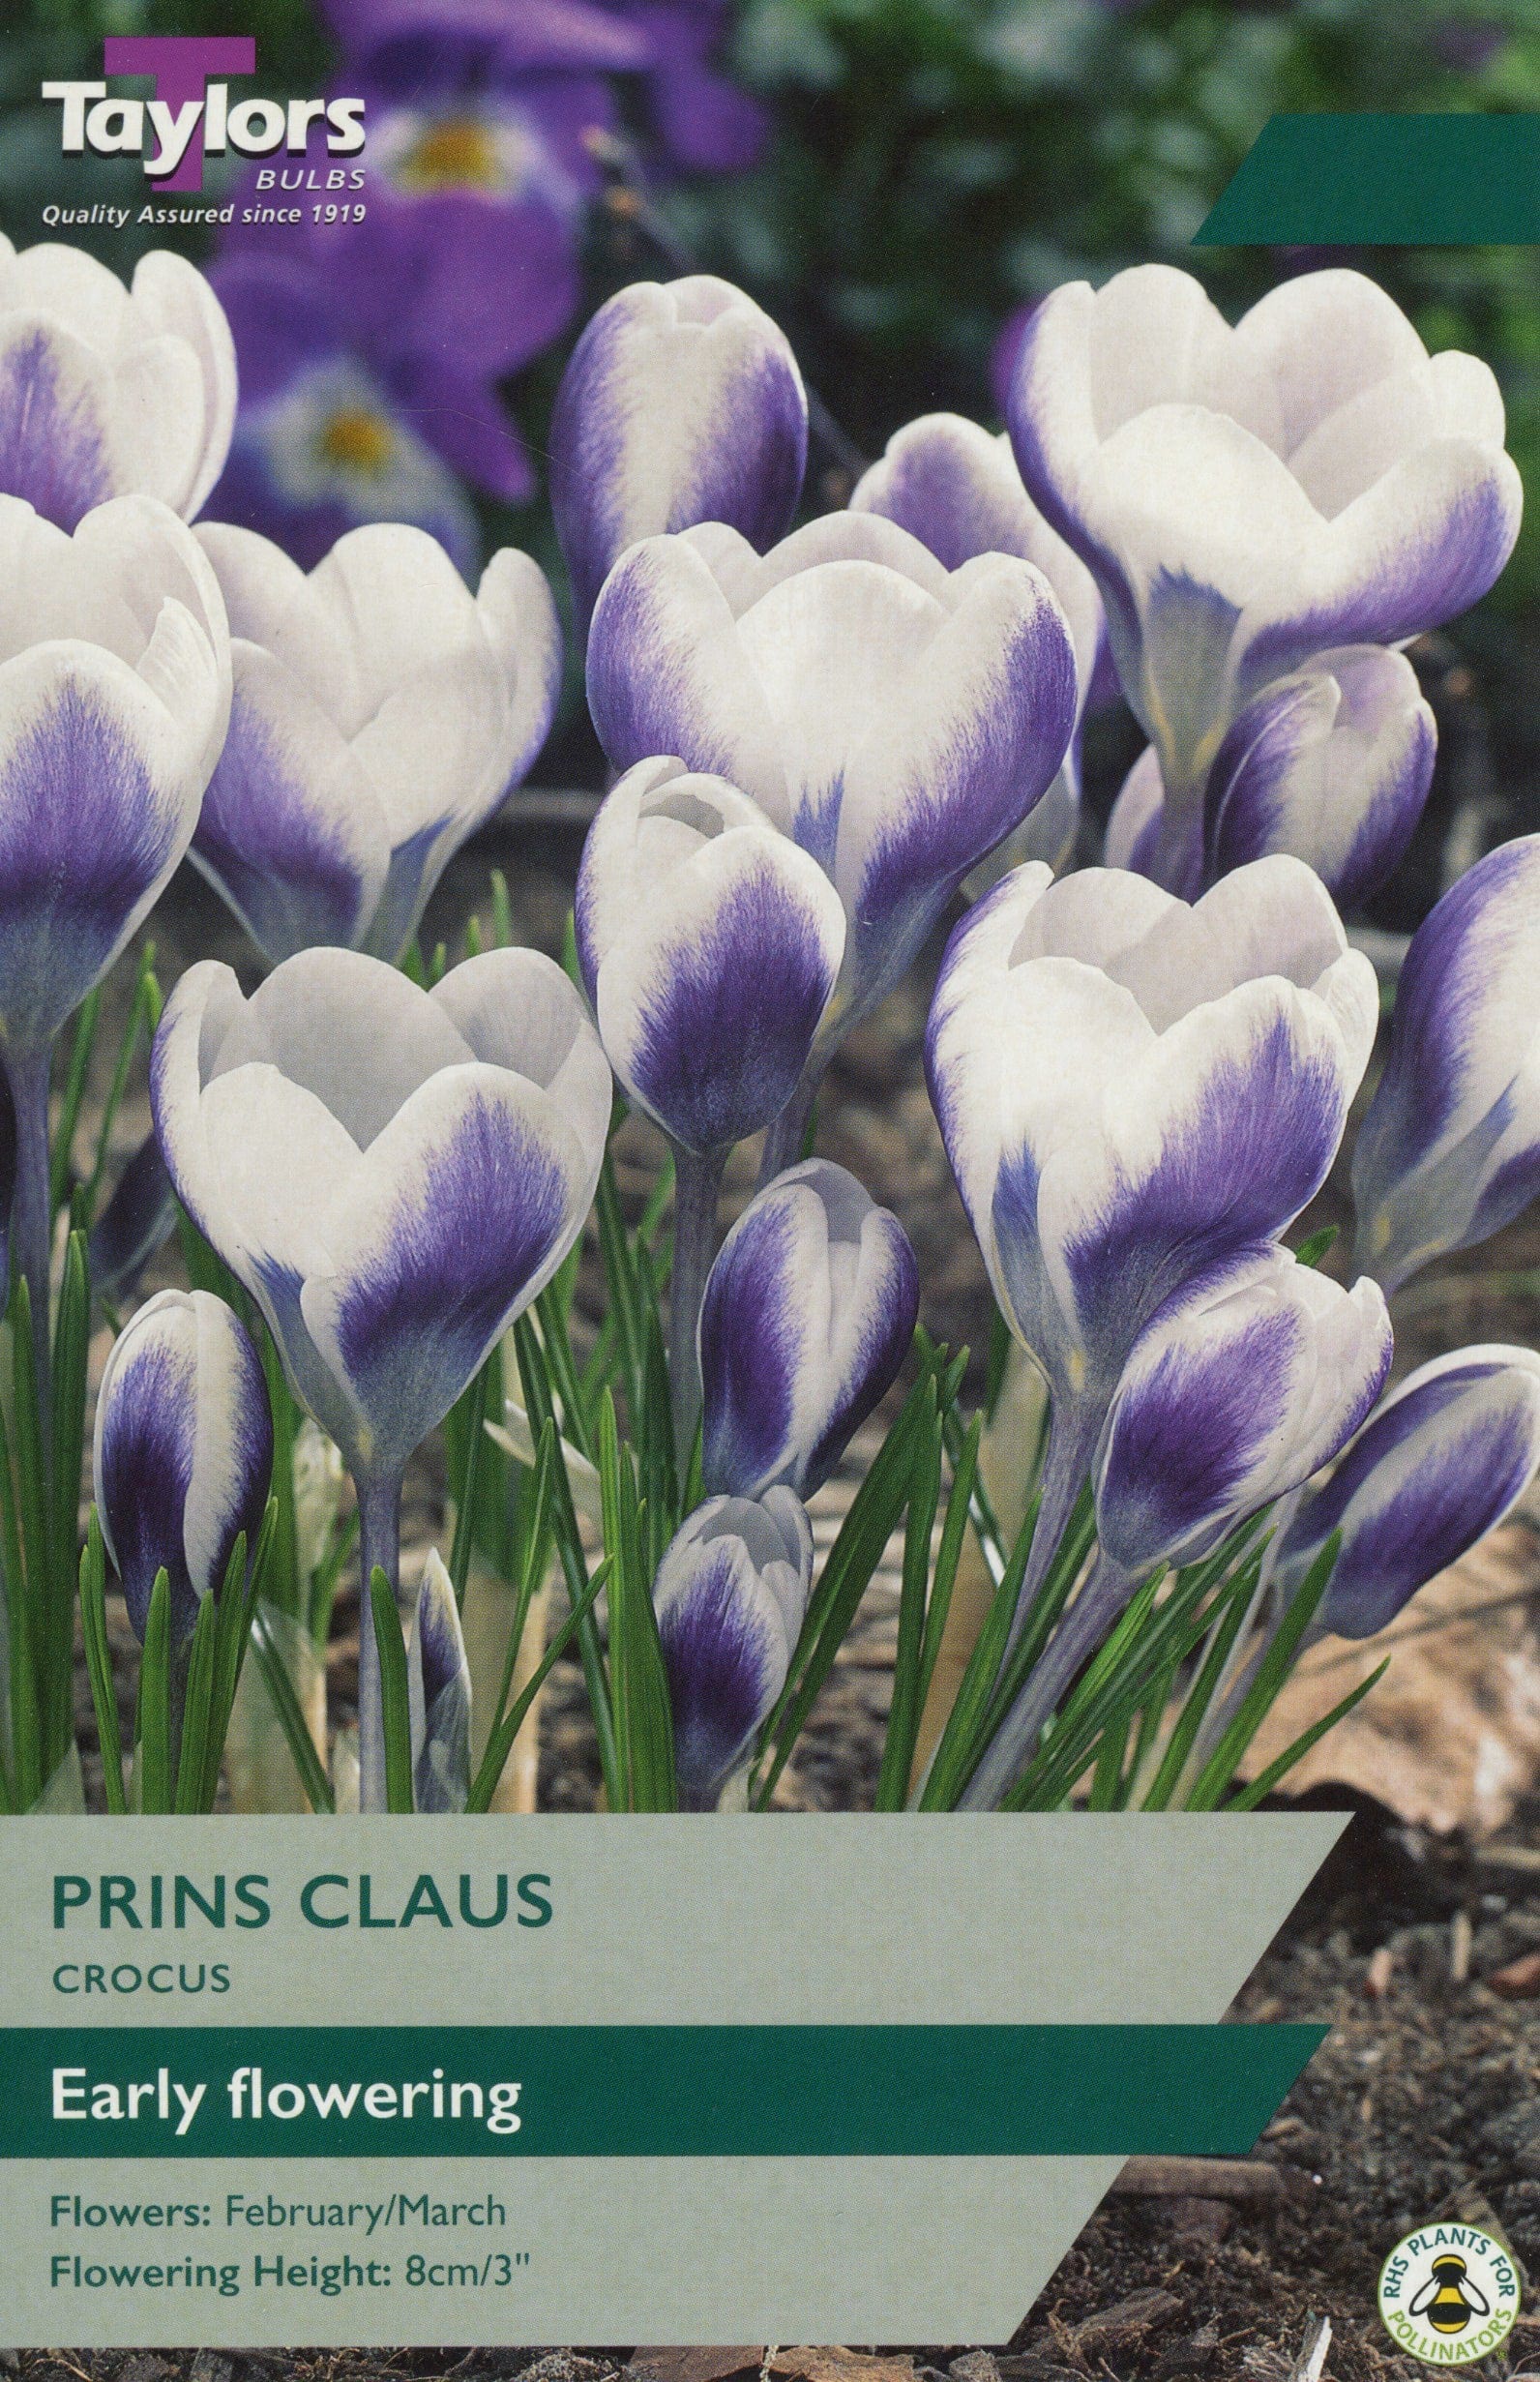 Taylors Taylors Crocus Taylors Bulbs Crocus Prins Claus 12 Pack